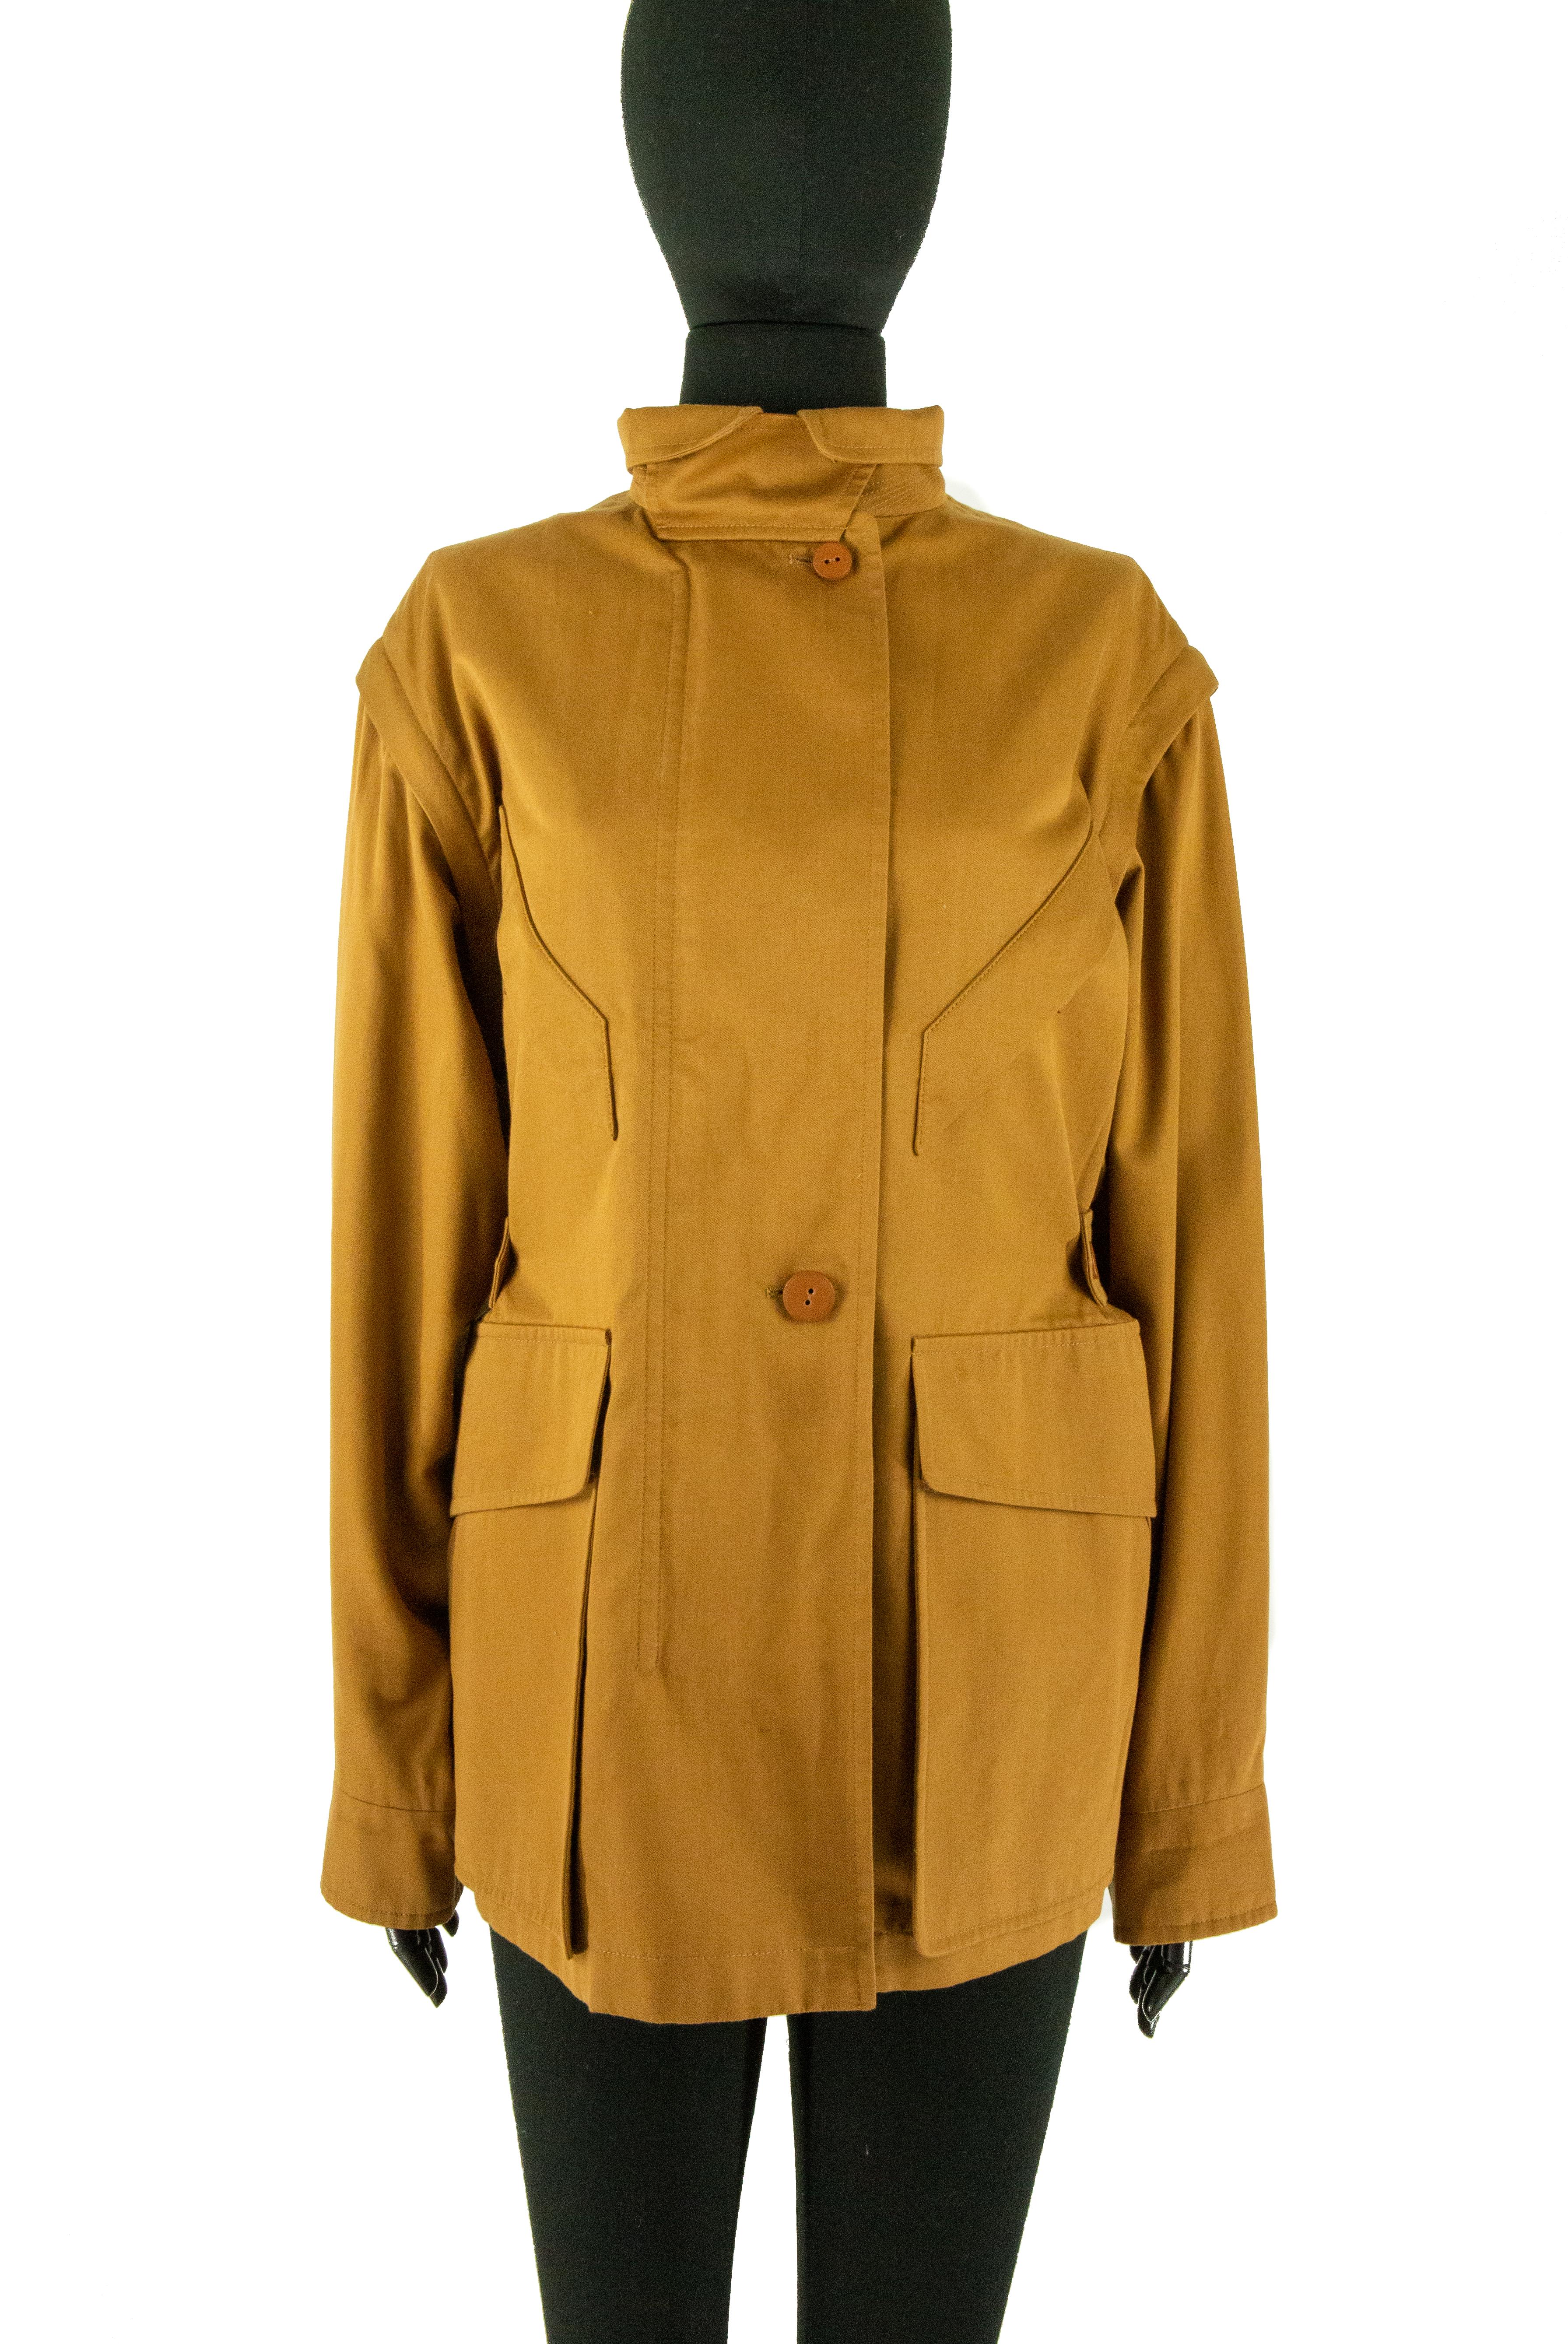 A tan Hermes jacket with detachable sleeves. This cotton jacket features 6 pockets at the front. Two pockets are at the bust of the jacket with a silver zipper and tan leather toggles. The other 4 pockets are in the same location as one another, the